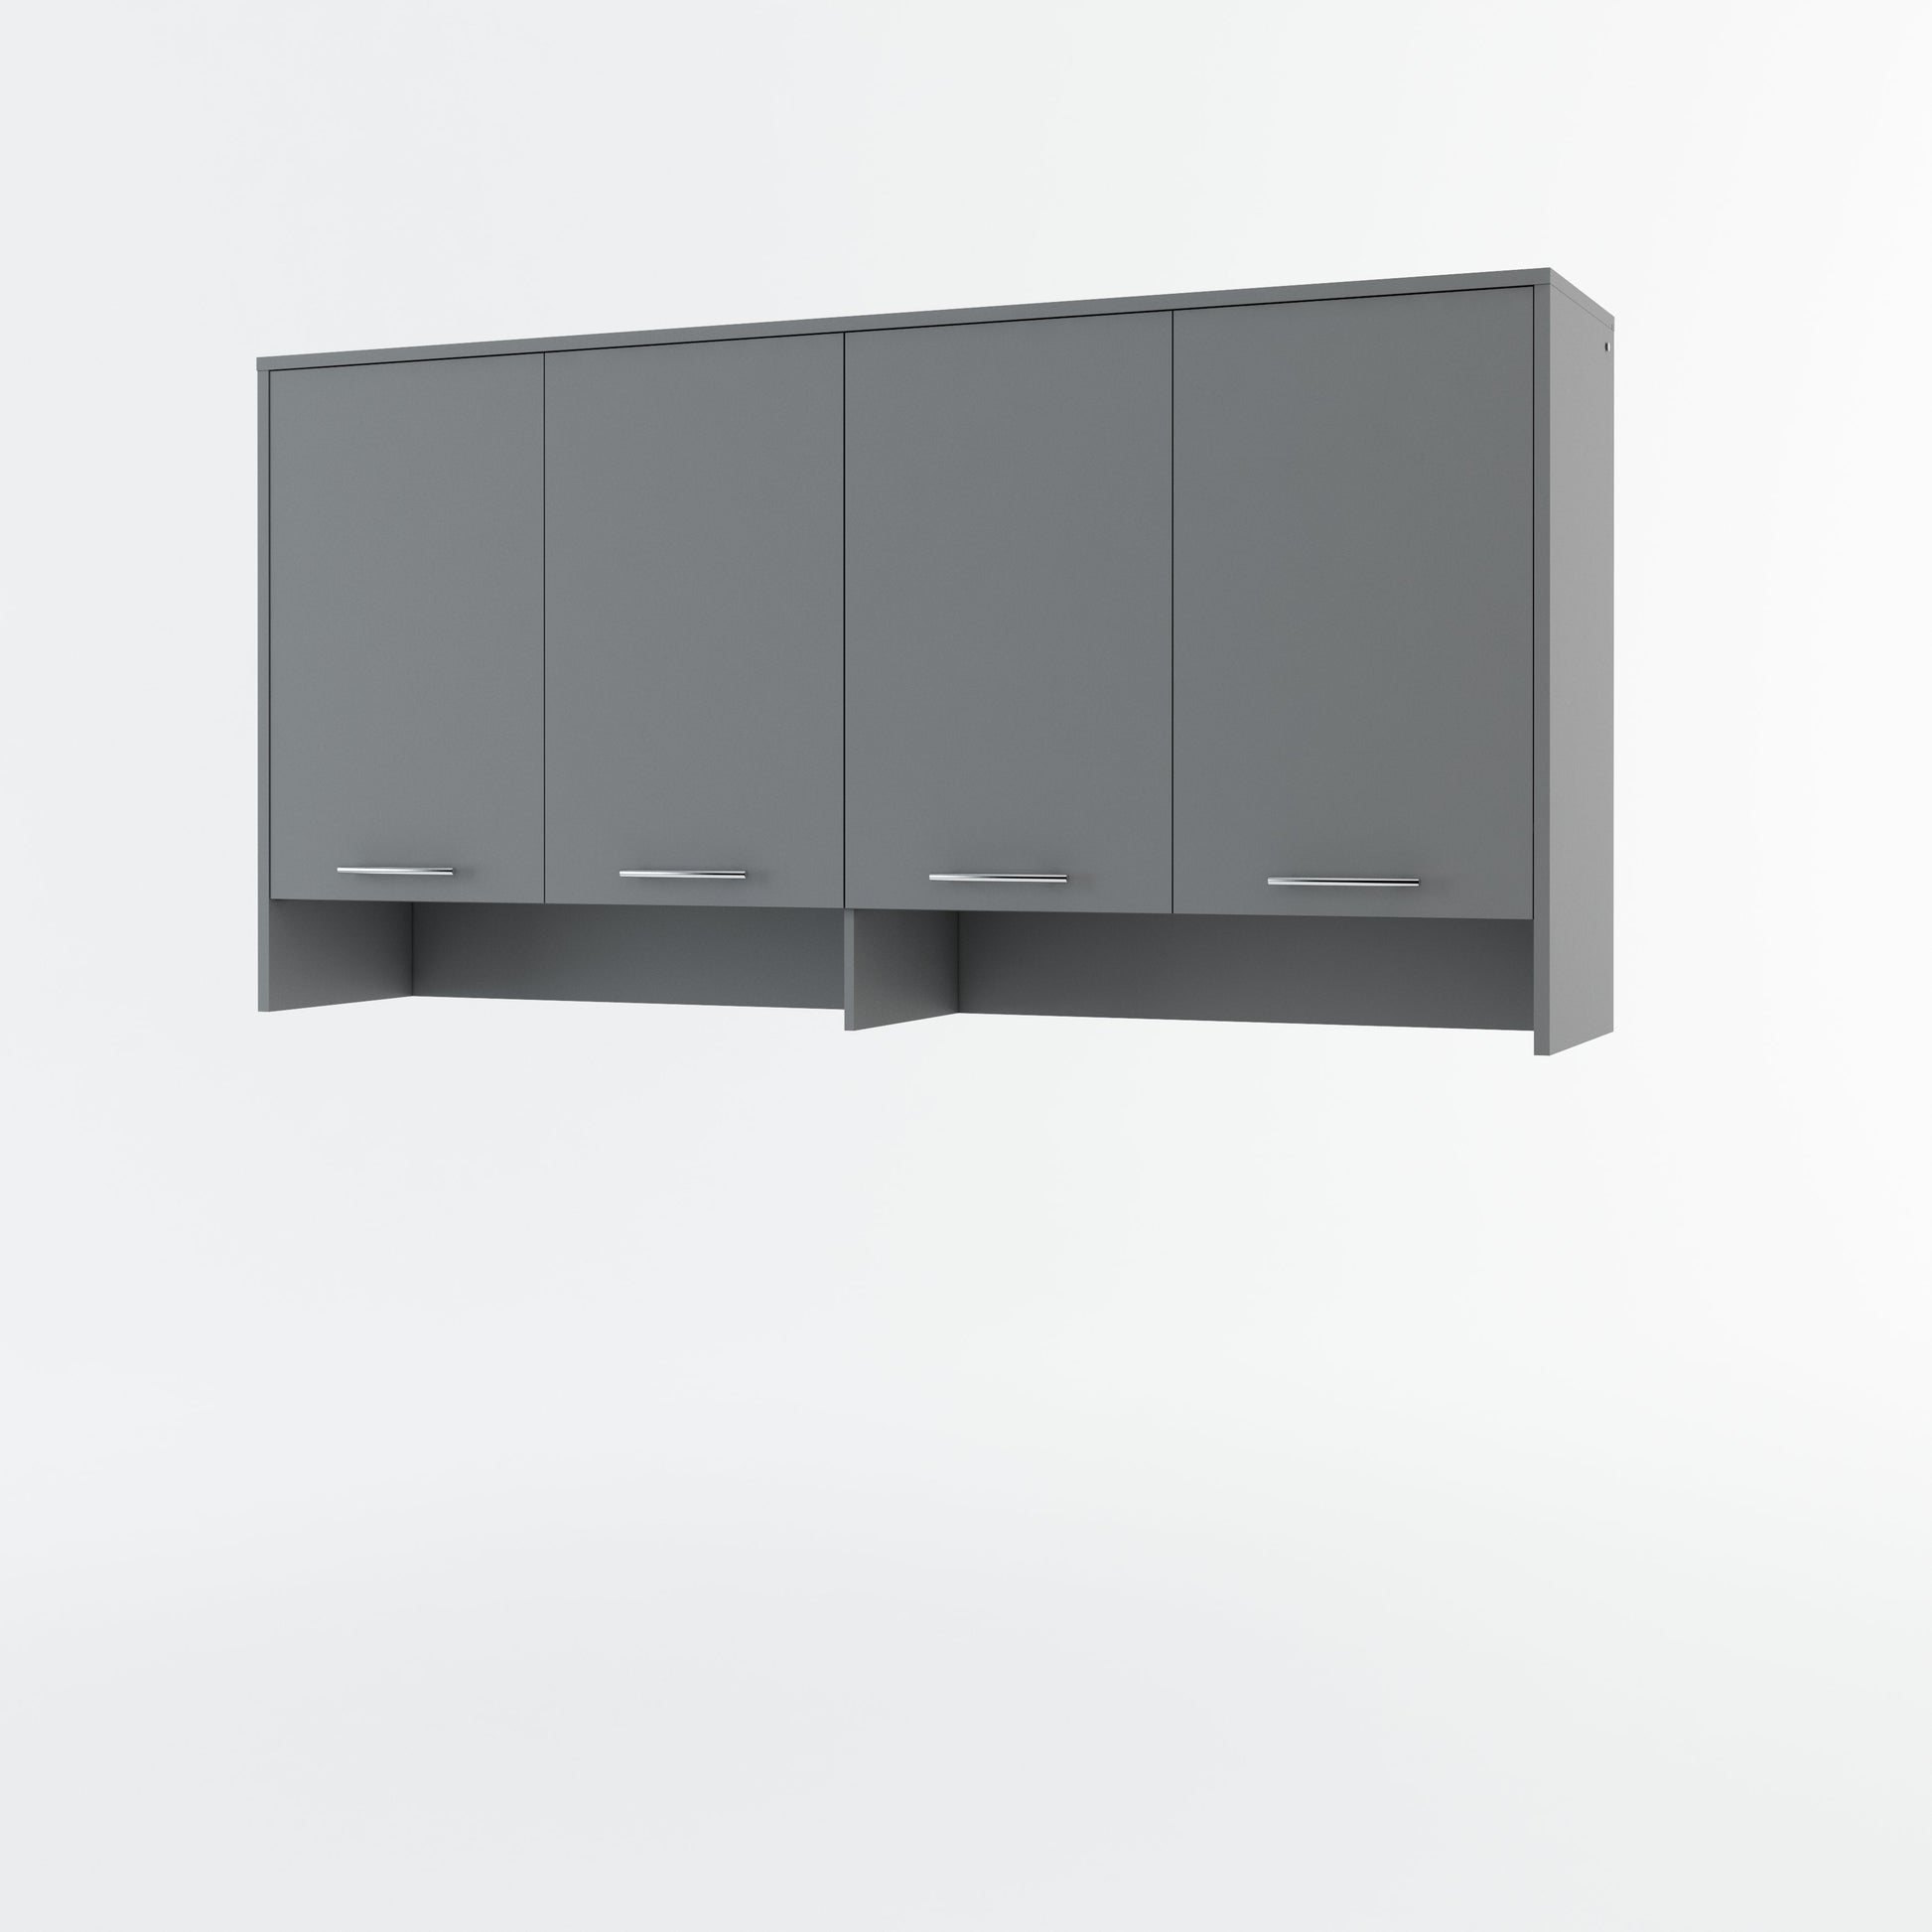 CP-11 Over Bed Unit for Horizontal Wall Bed Concept 90cm Grey Matt Wall Bed with Storage Unit 